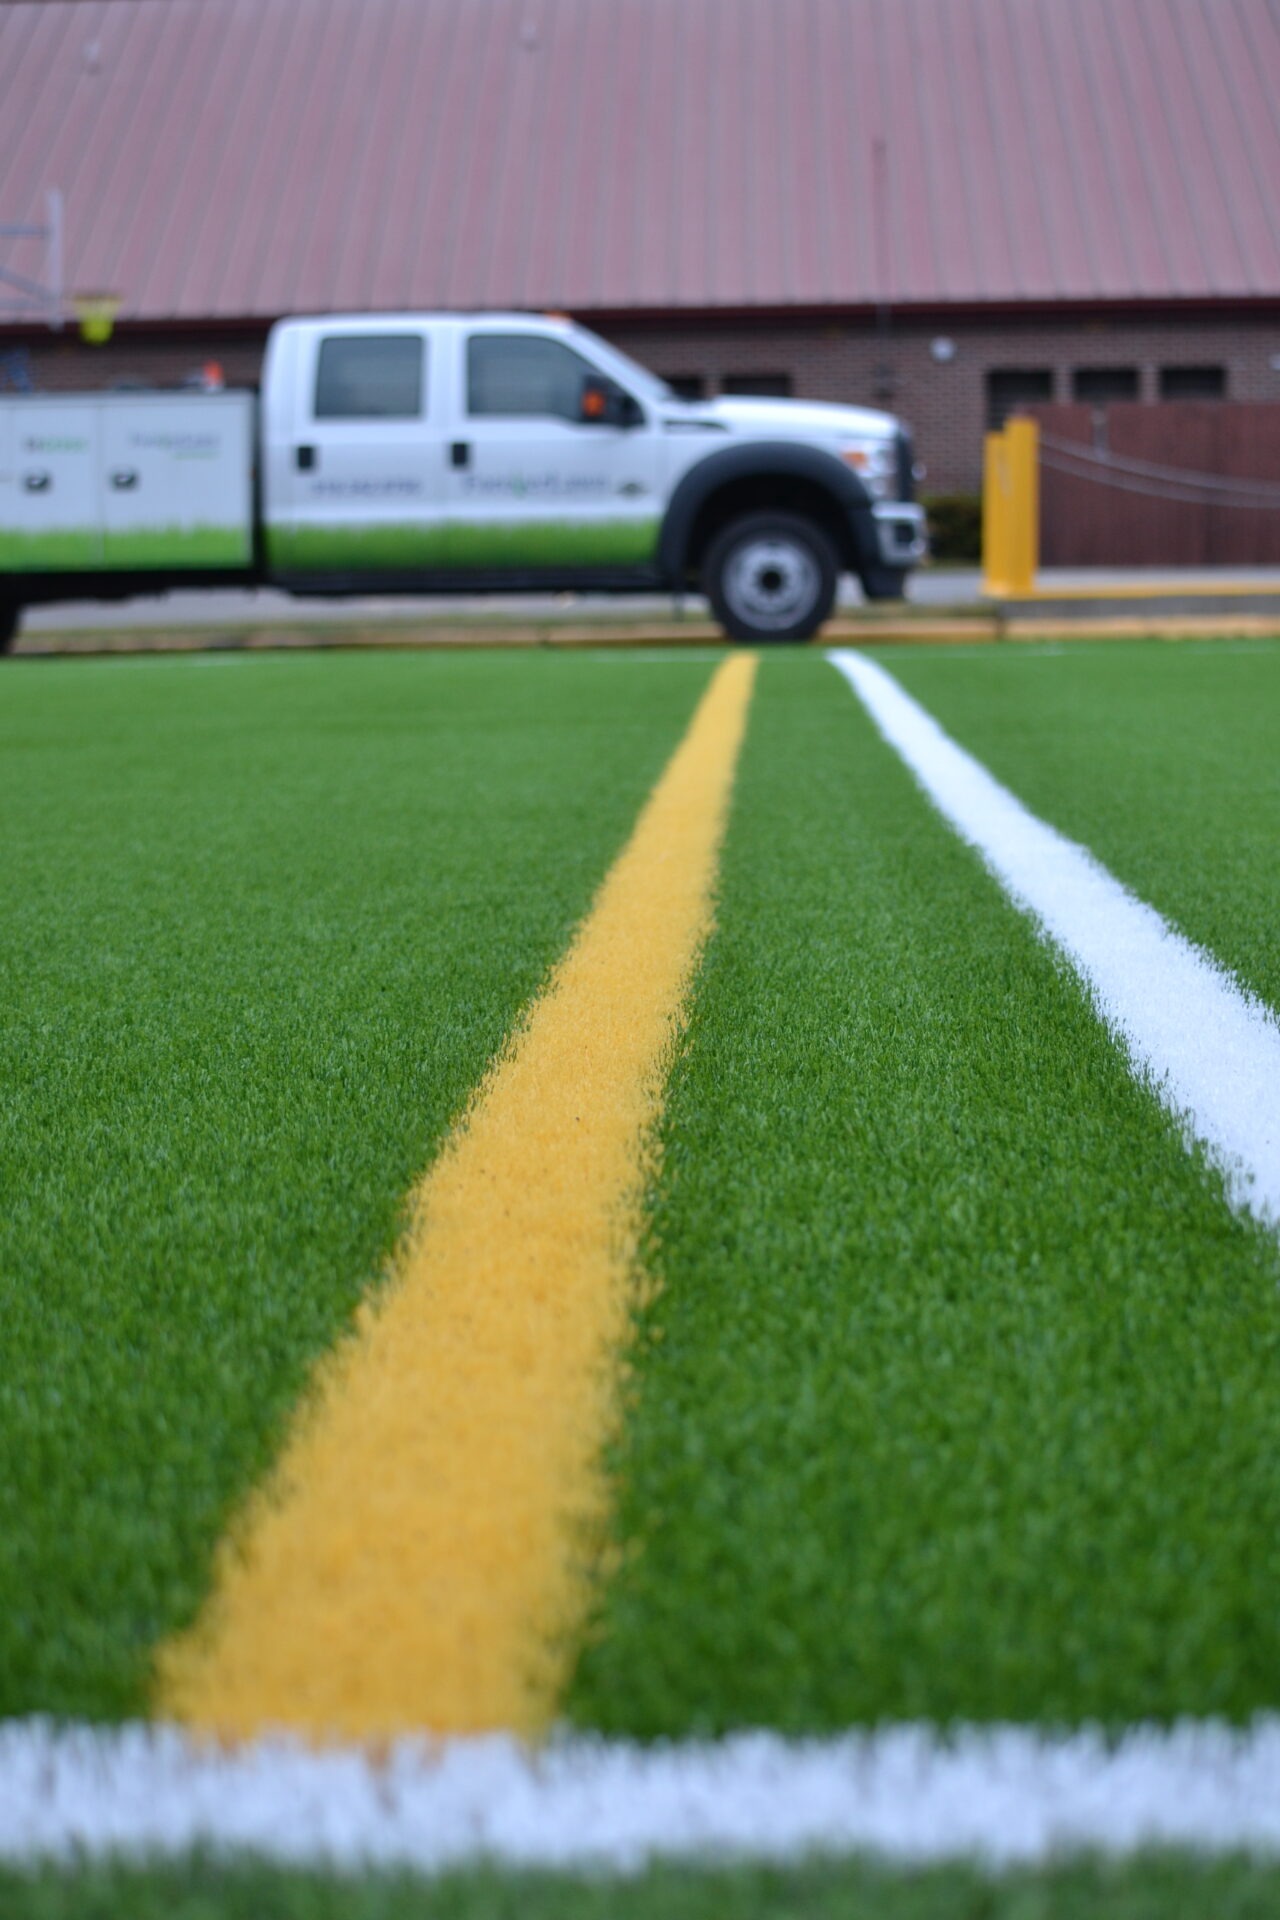 The image features a close-up view of artificial green turf with yellow and white boundary lines. In the blurred background, there's a parked vehicle.